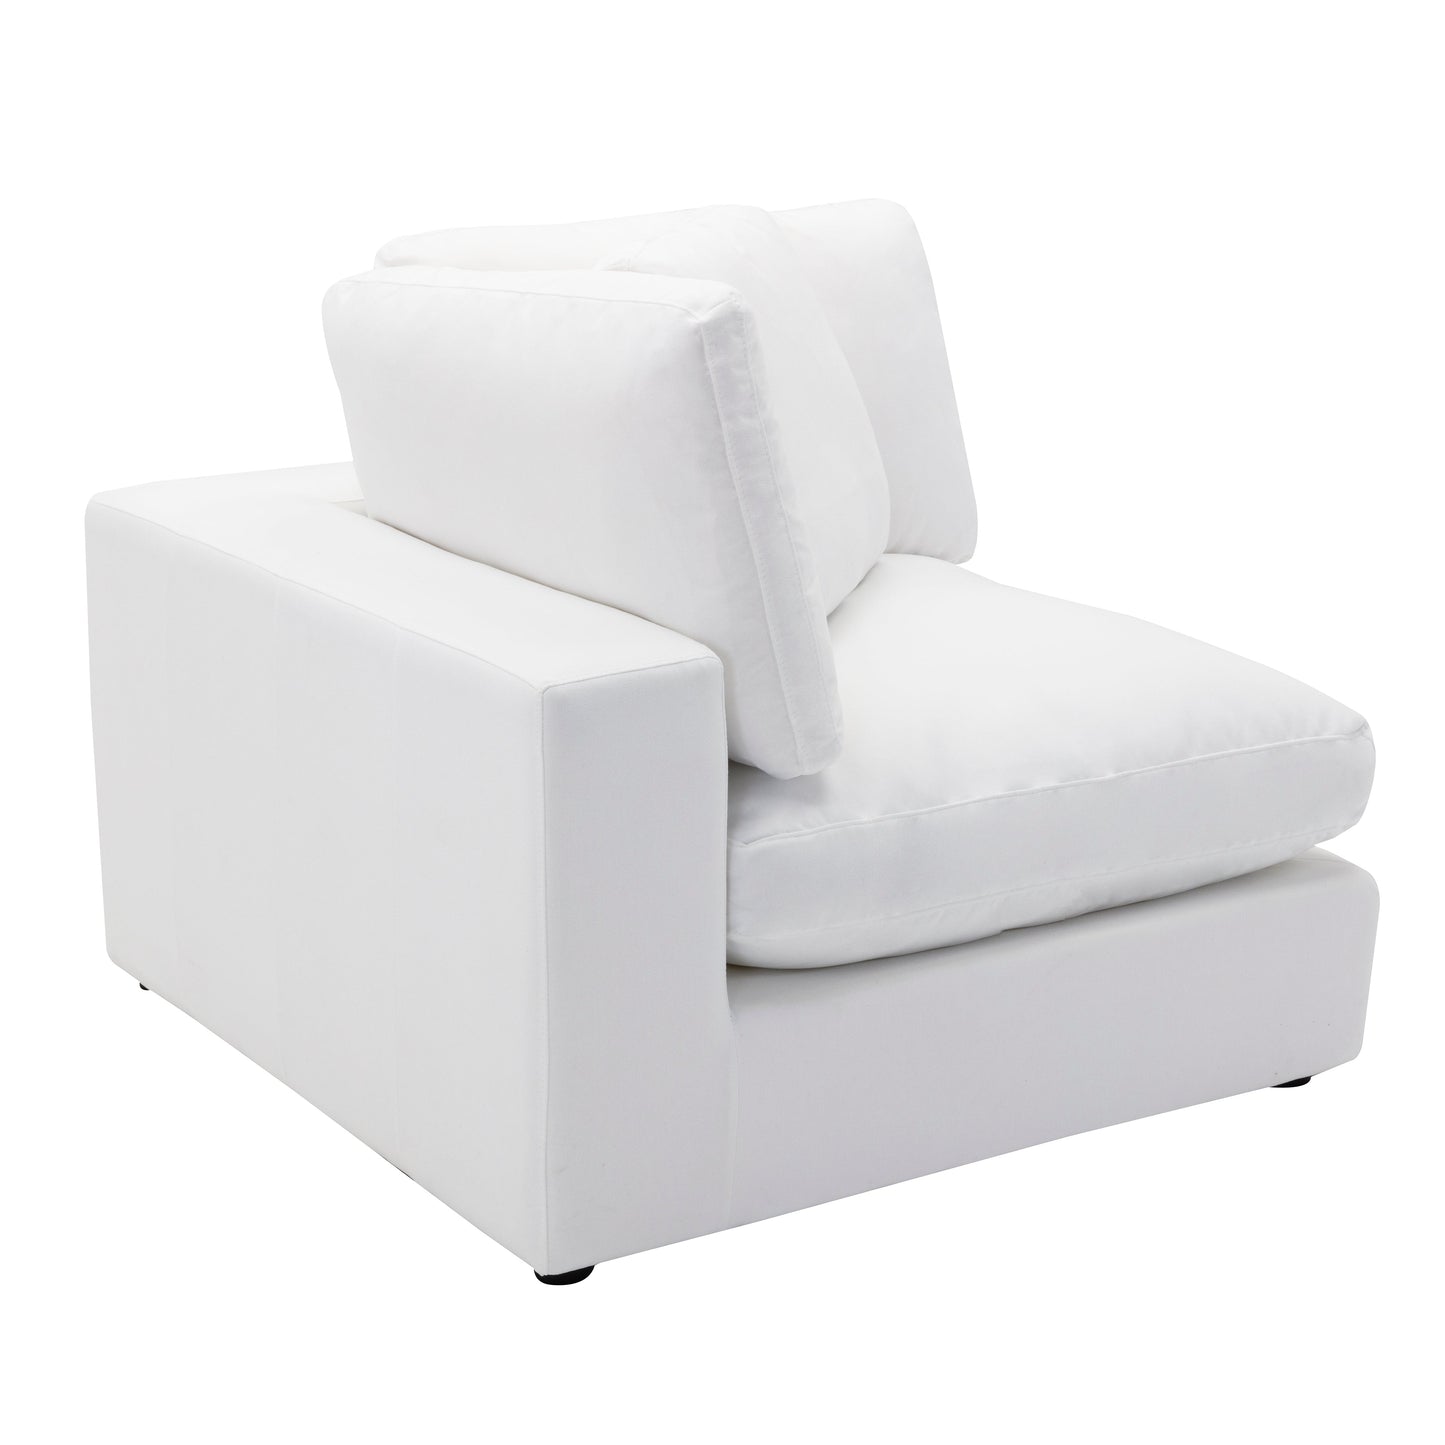 Rivas Contemporary Feather Fill 5-Piece Modular Sectional Sofa with Two Ottomans, White